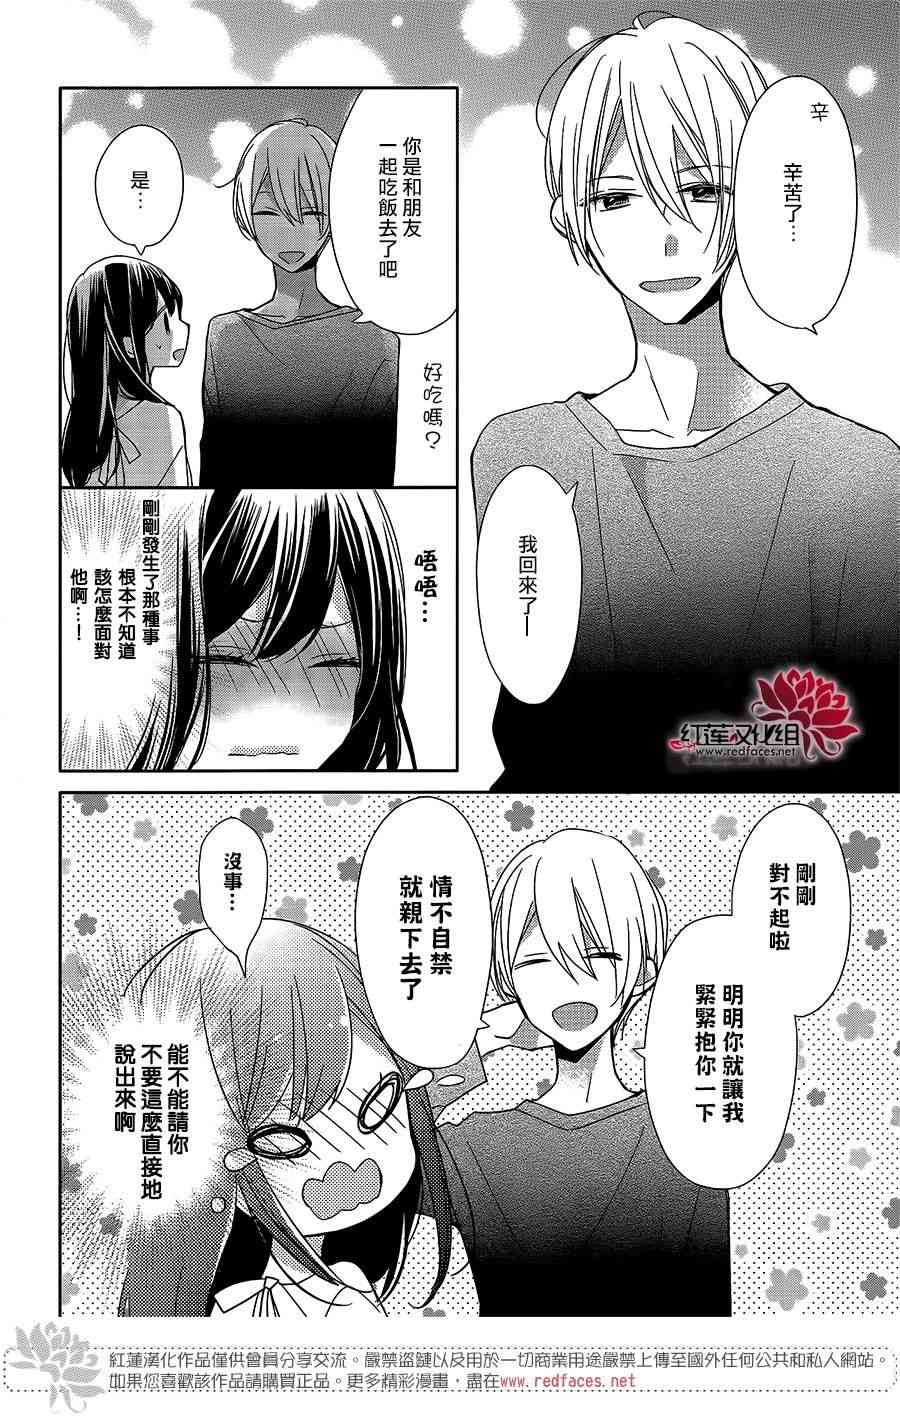 If given a second chance - 6話 - 5